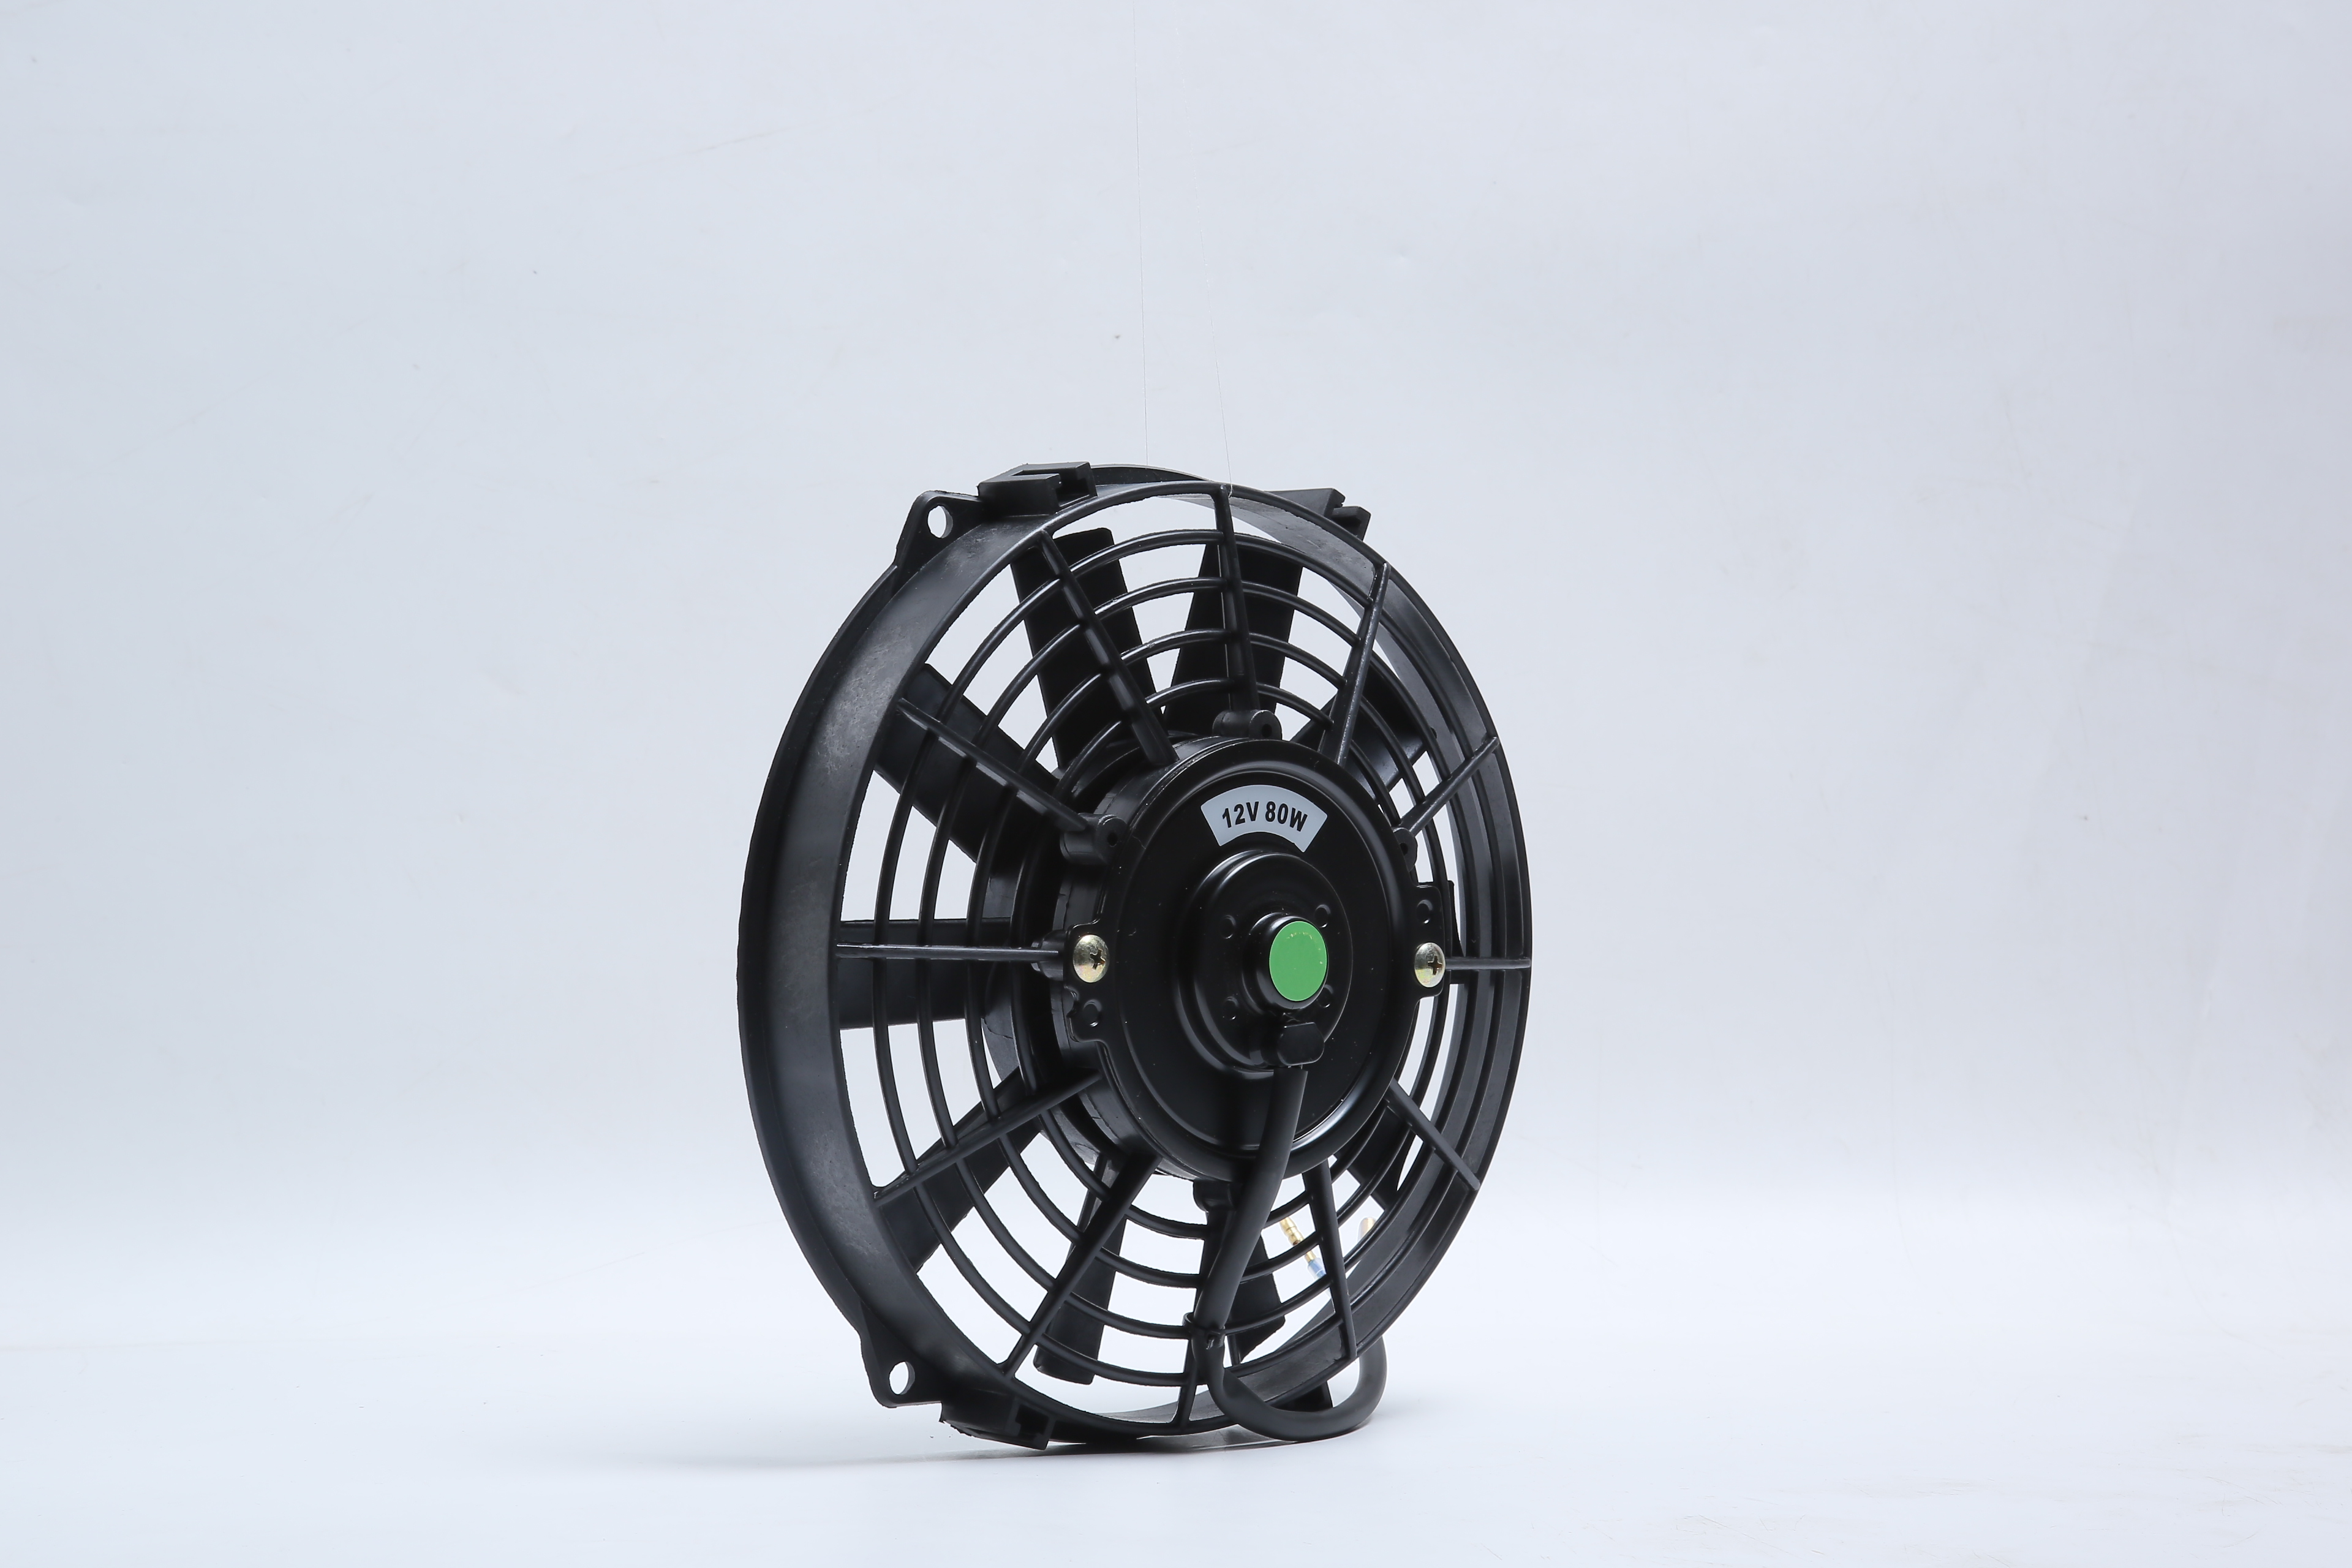  DC 12V 80W 9inch Cooling Radiator Fan Blow/suction